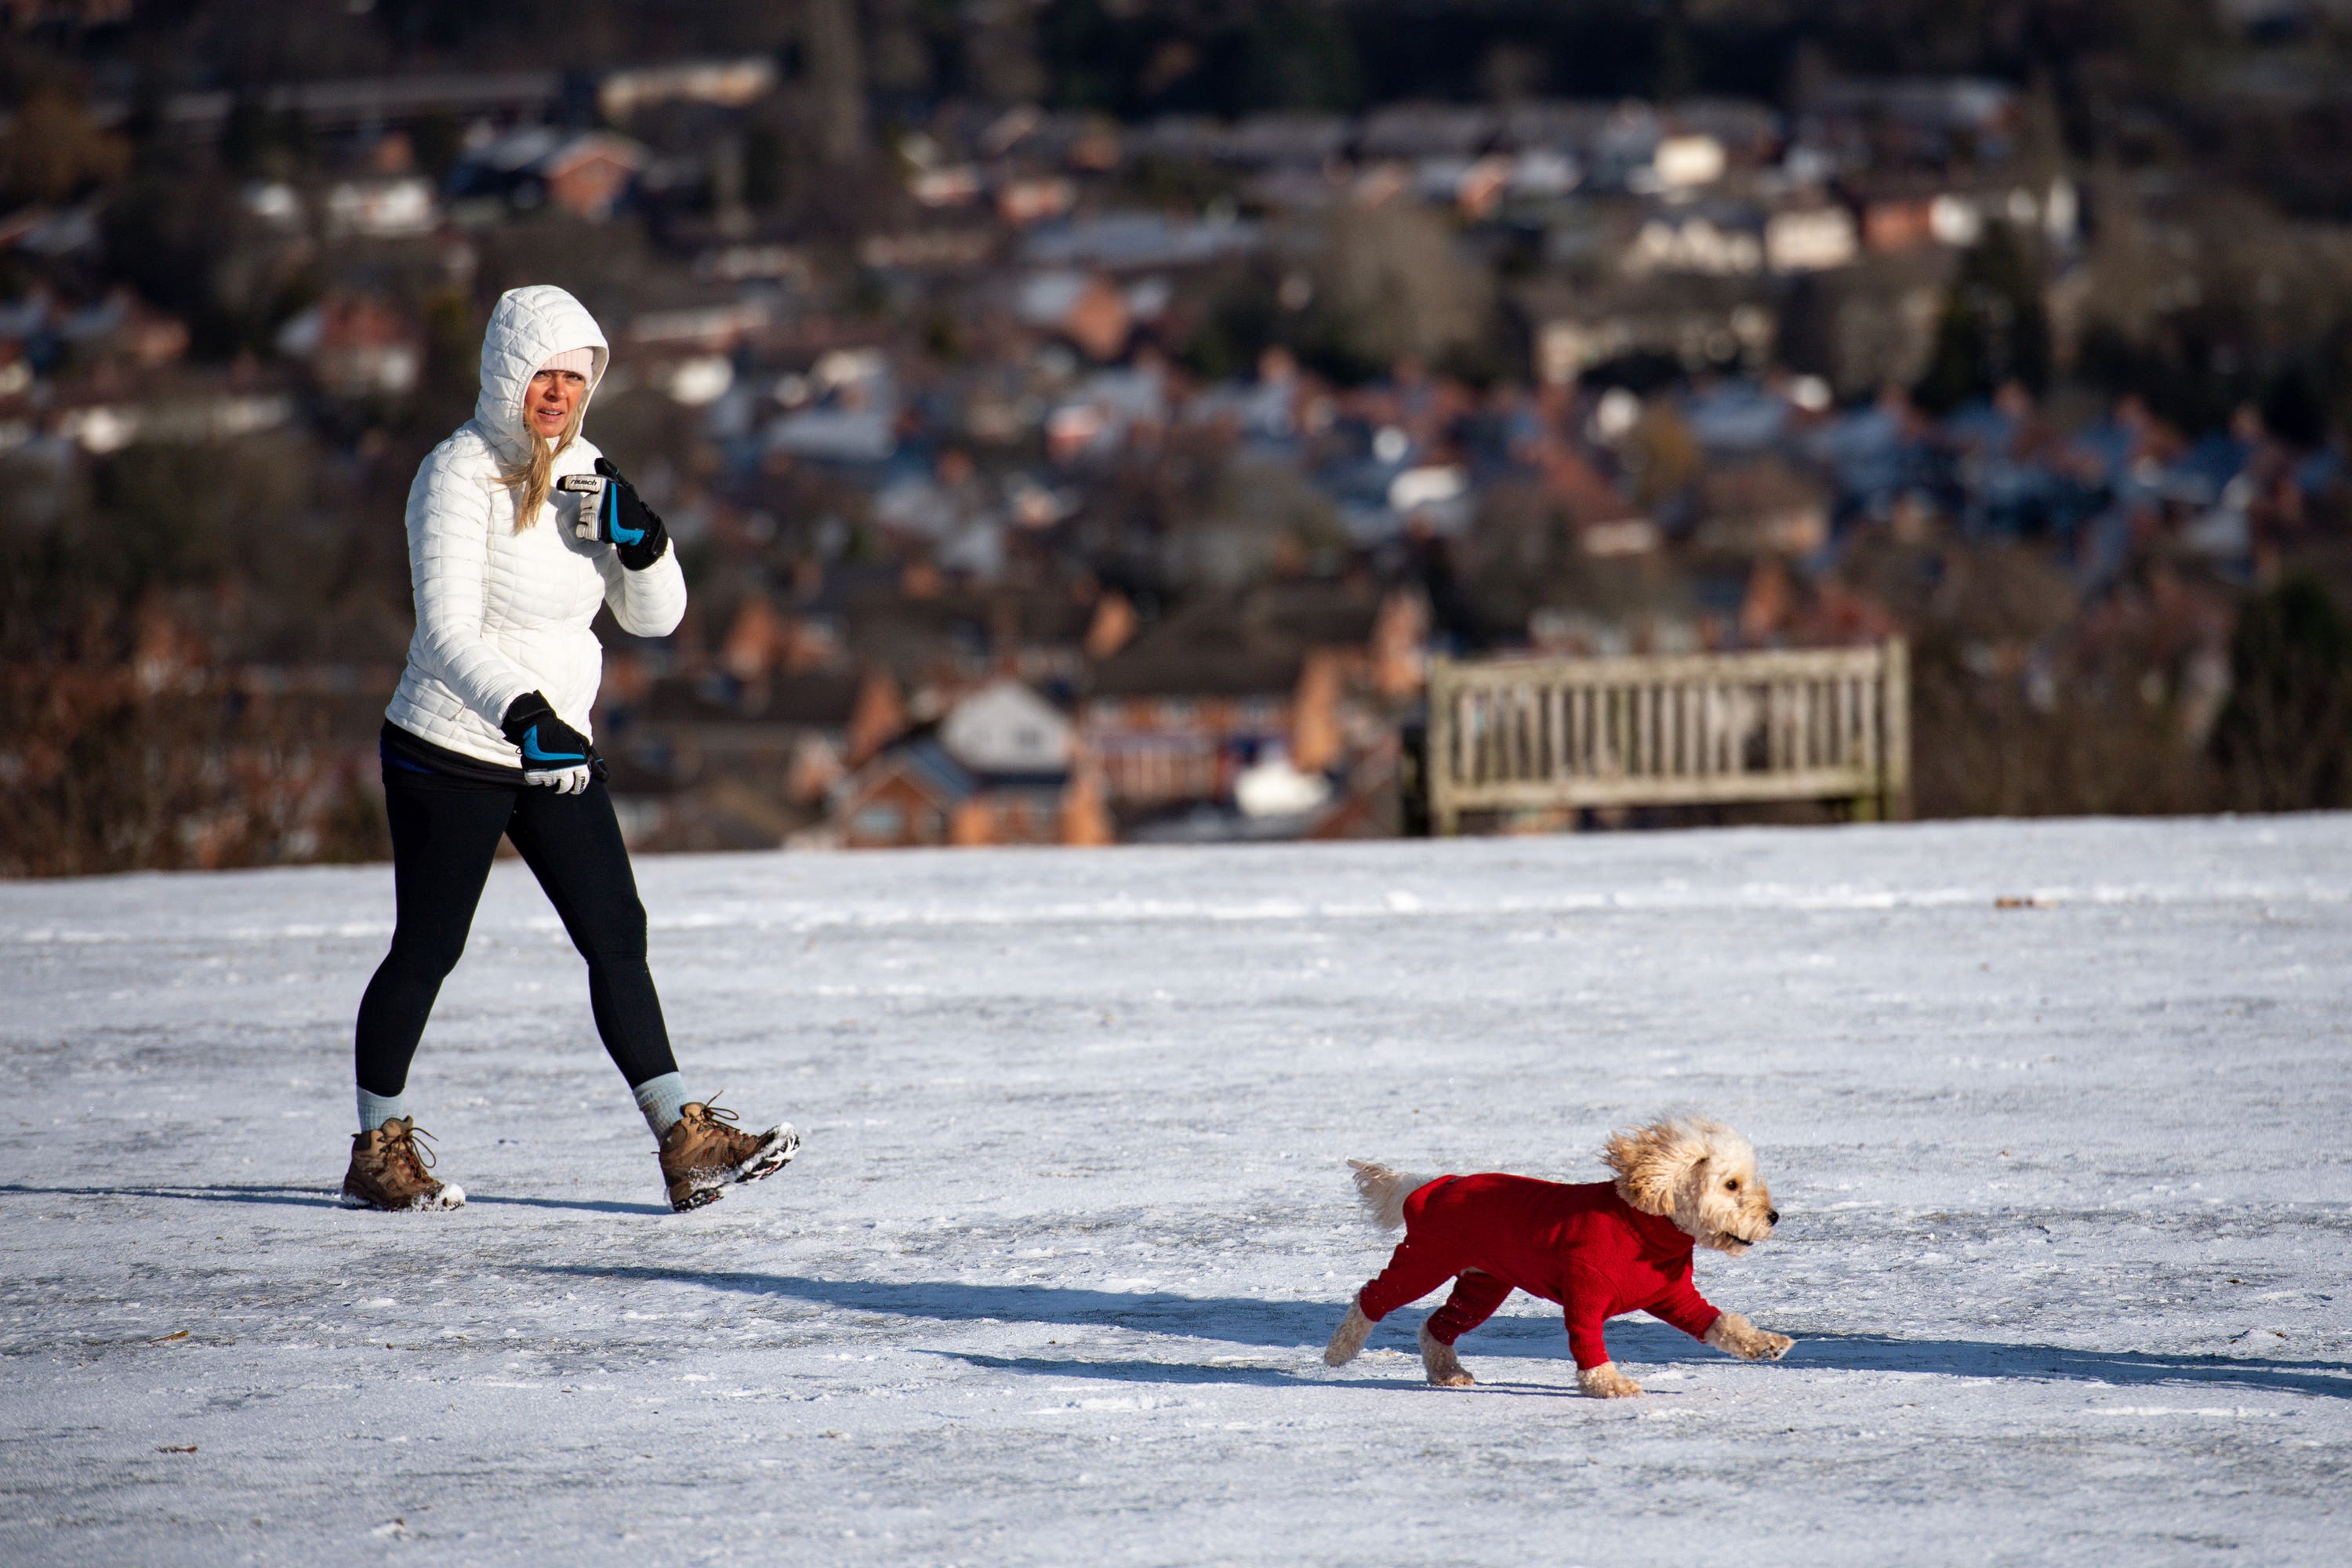 The RSPCA has recommended dressing dogs in comfortable coats to keep them warm as temperatures plummet (Jacob King/PA).